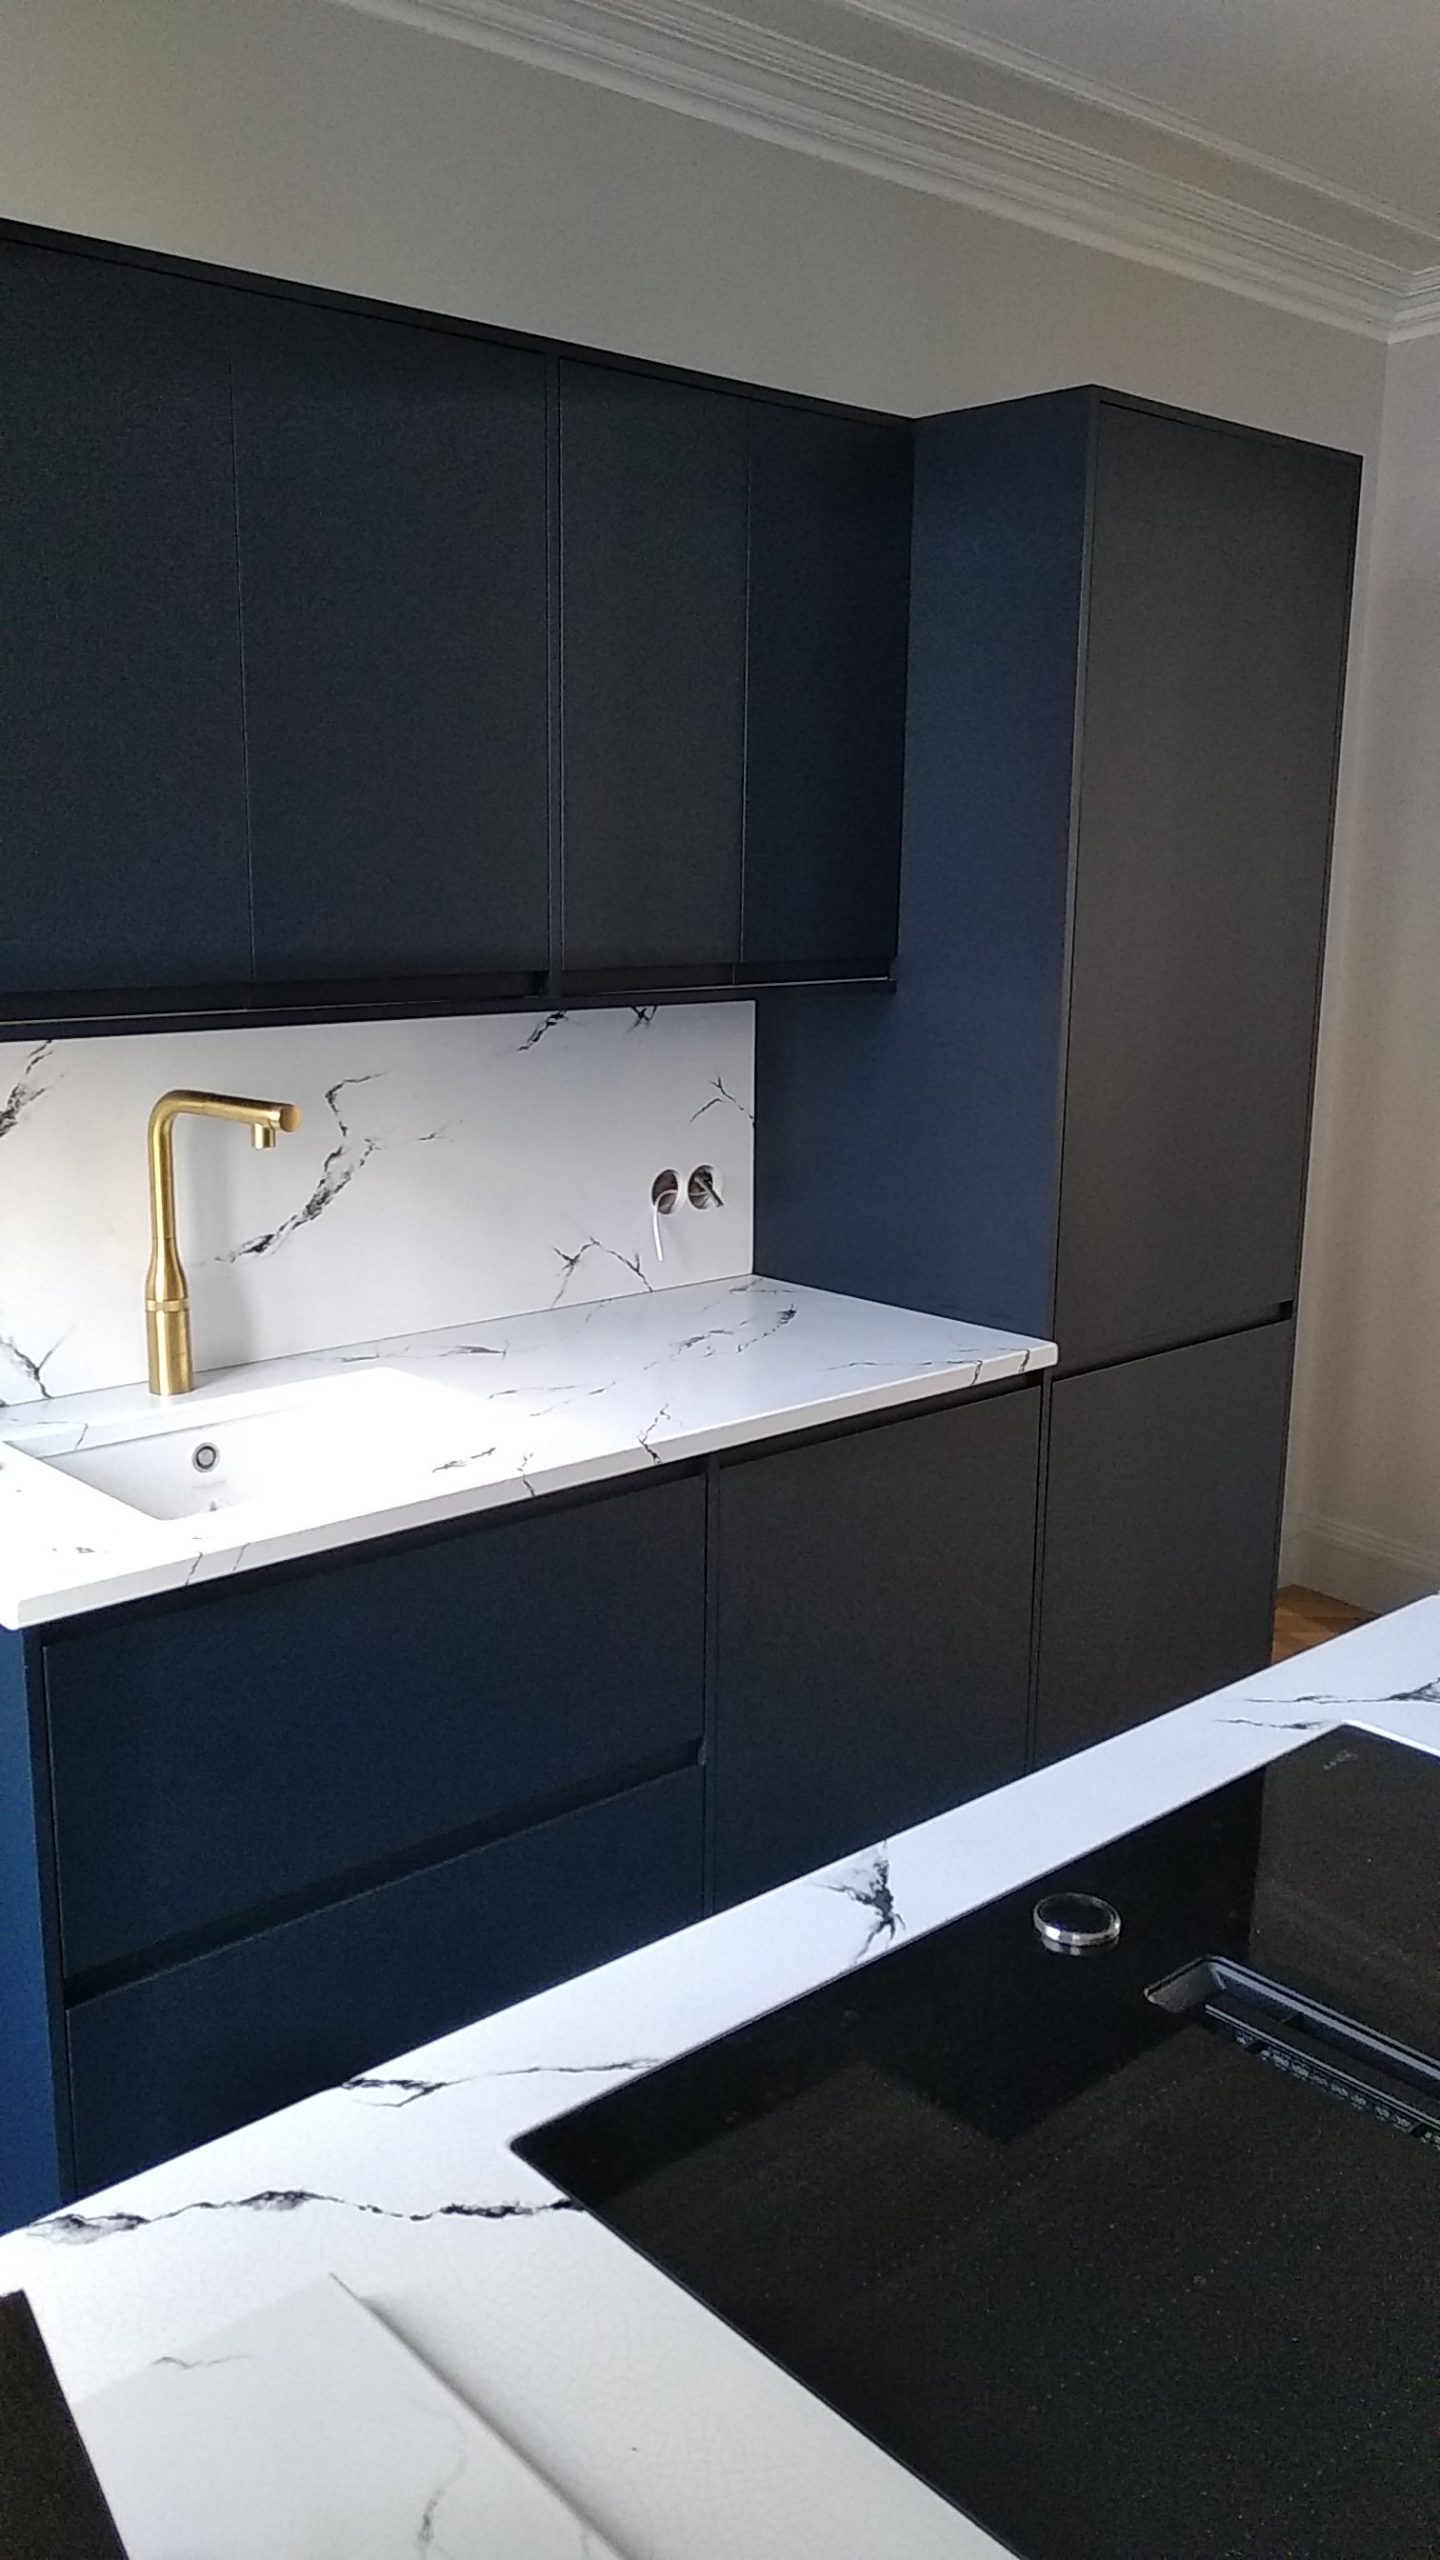 Enamelled lava stone kitchen tops credenza and central island